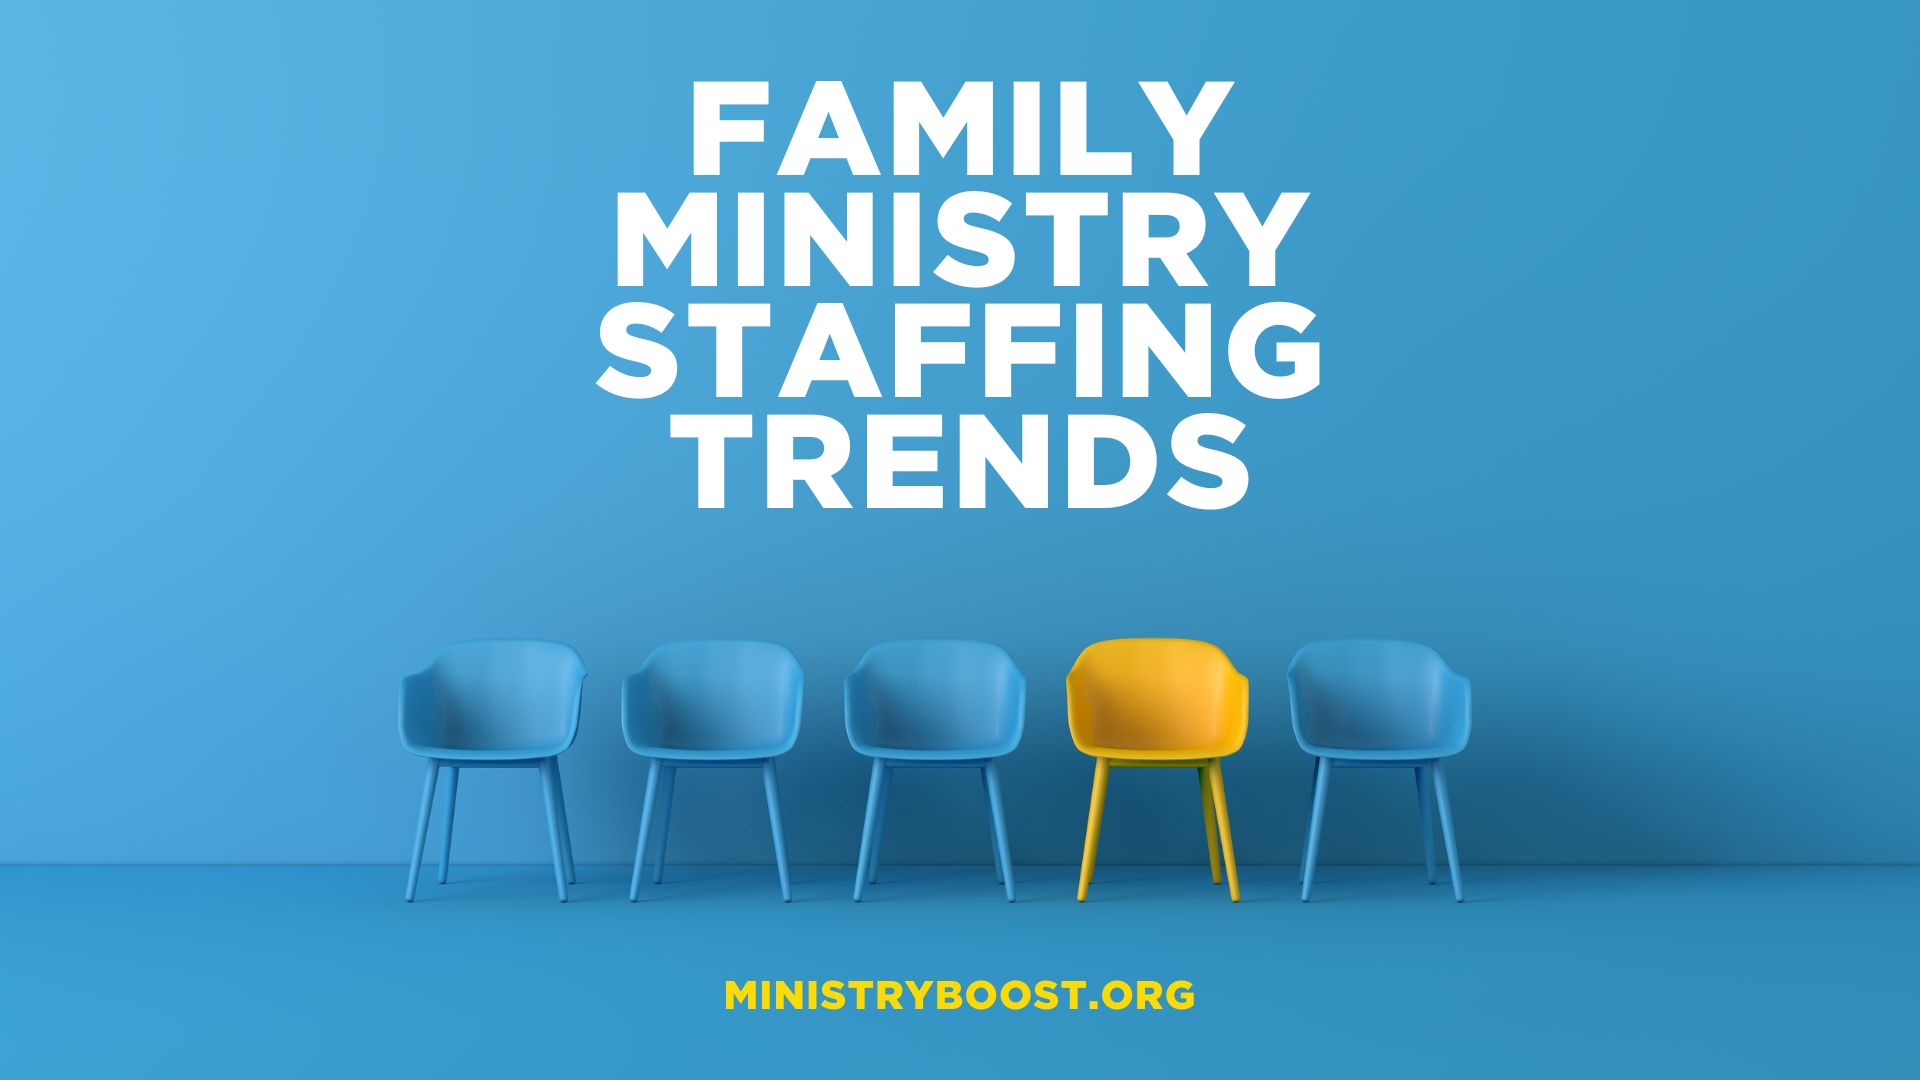 Family Ministry Staffing Trends 1920x1080 1